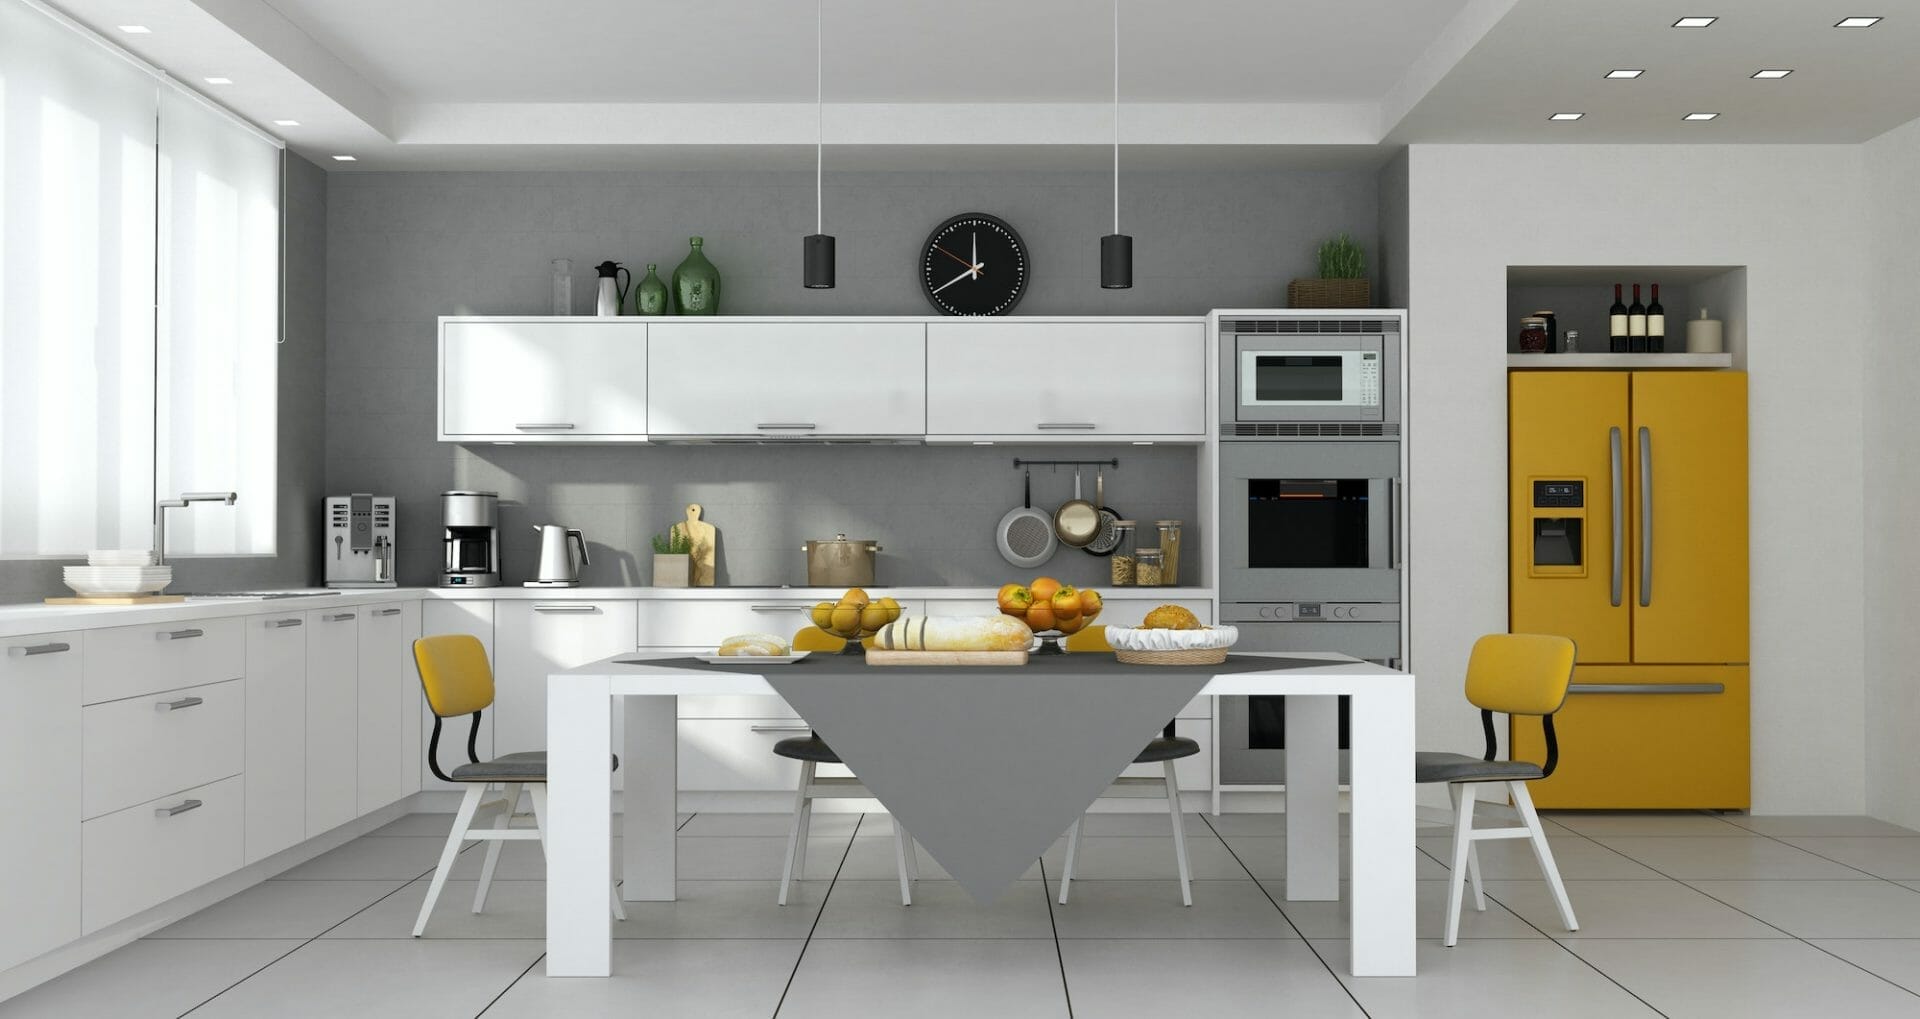 Modern Kitchen With Table Set And Built-In Yellow Fridge - 3D Rendering